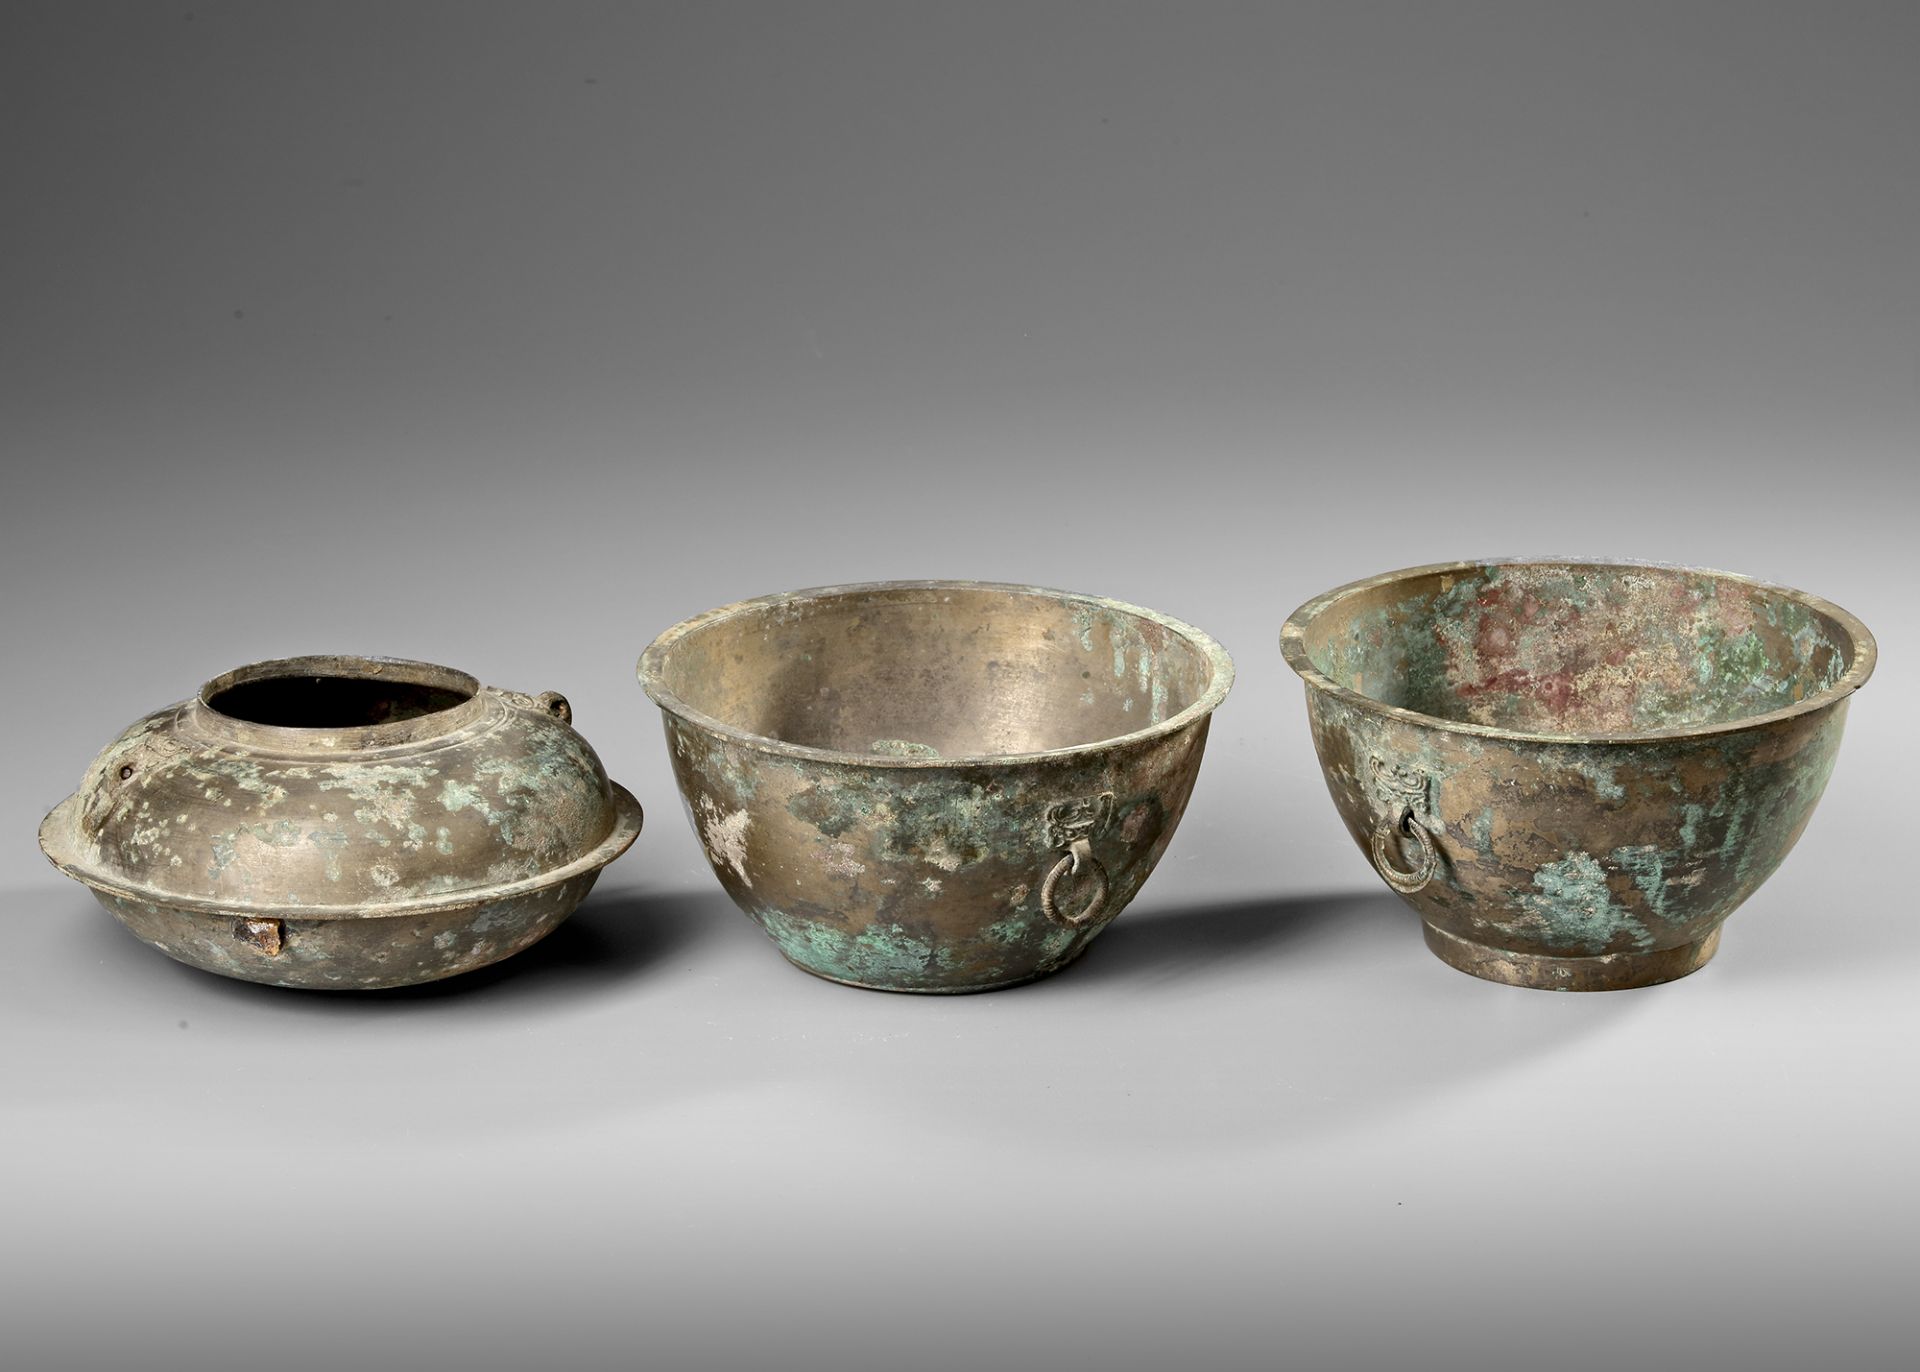 A CHINESE 3 PARTS STEAMER, HAN DYNASTY (206 BC-220 AD) - Image 5 of 8